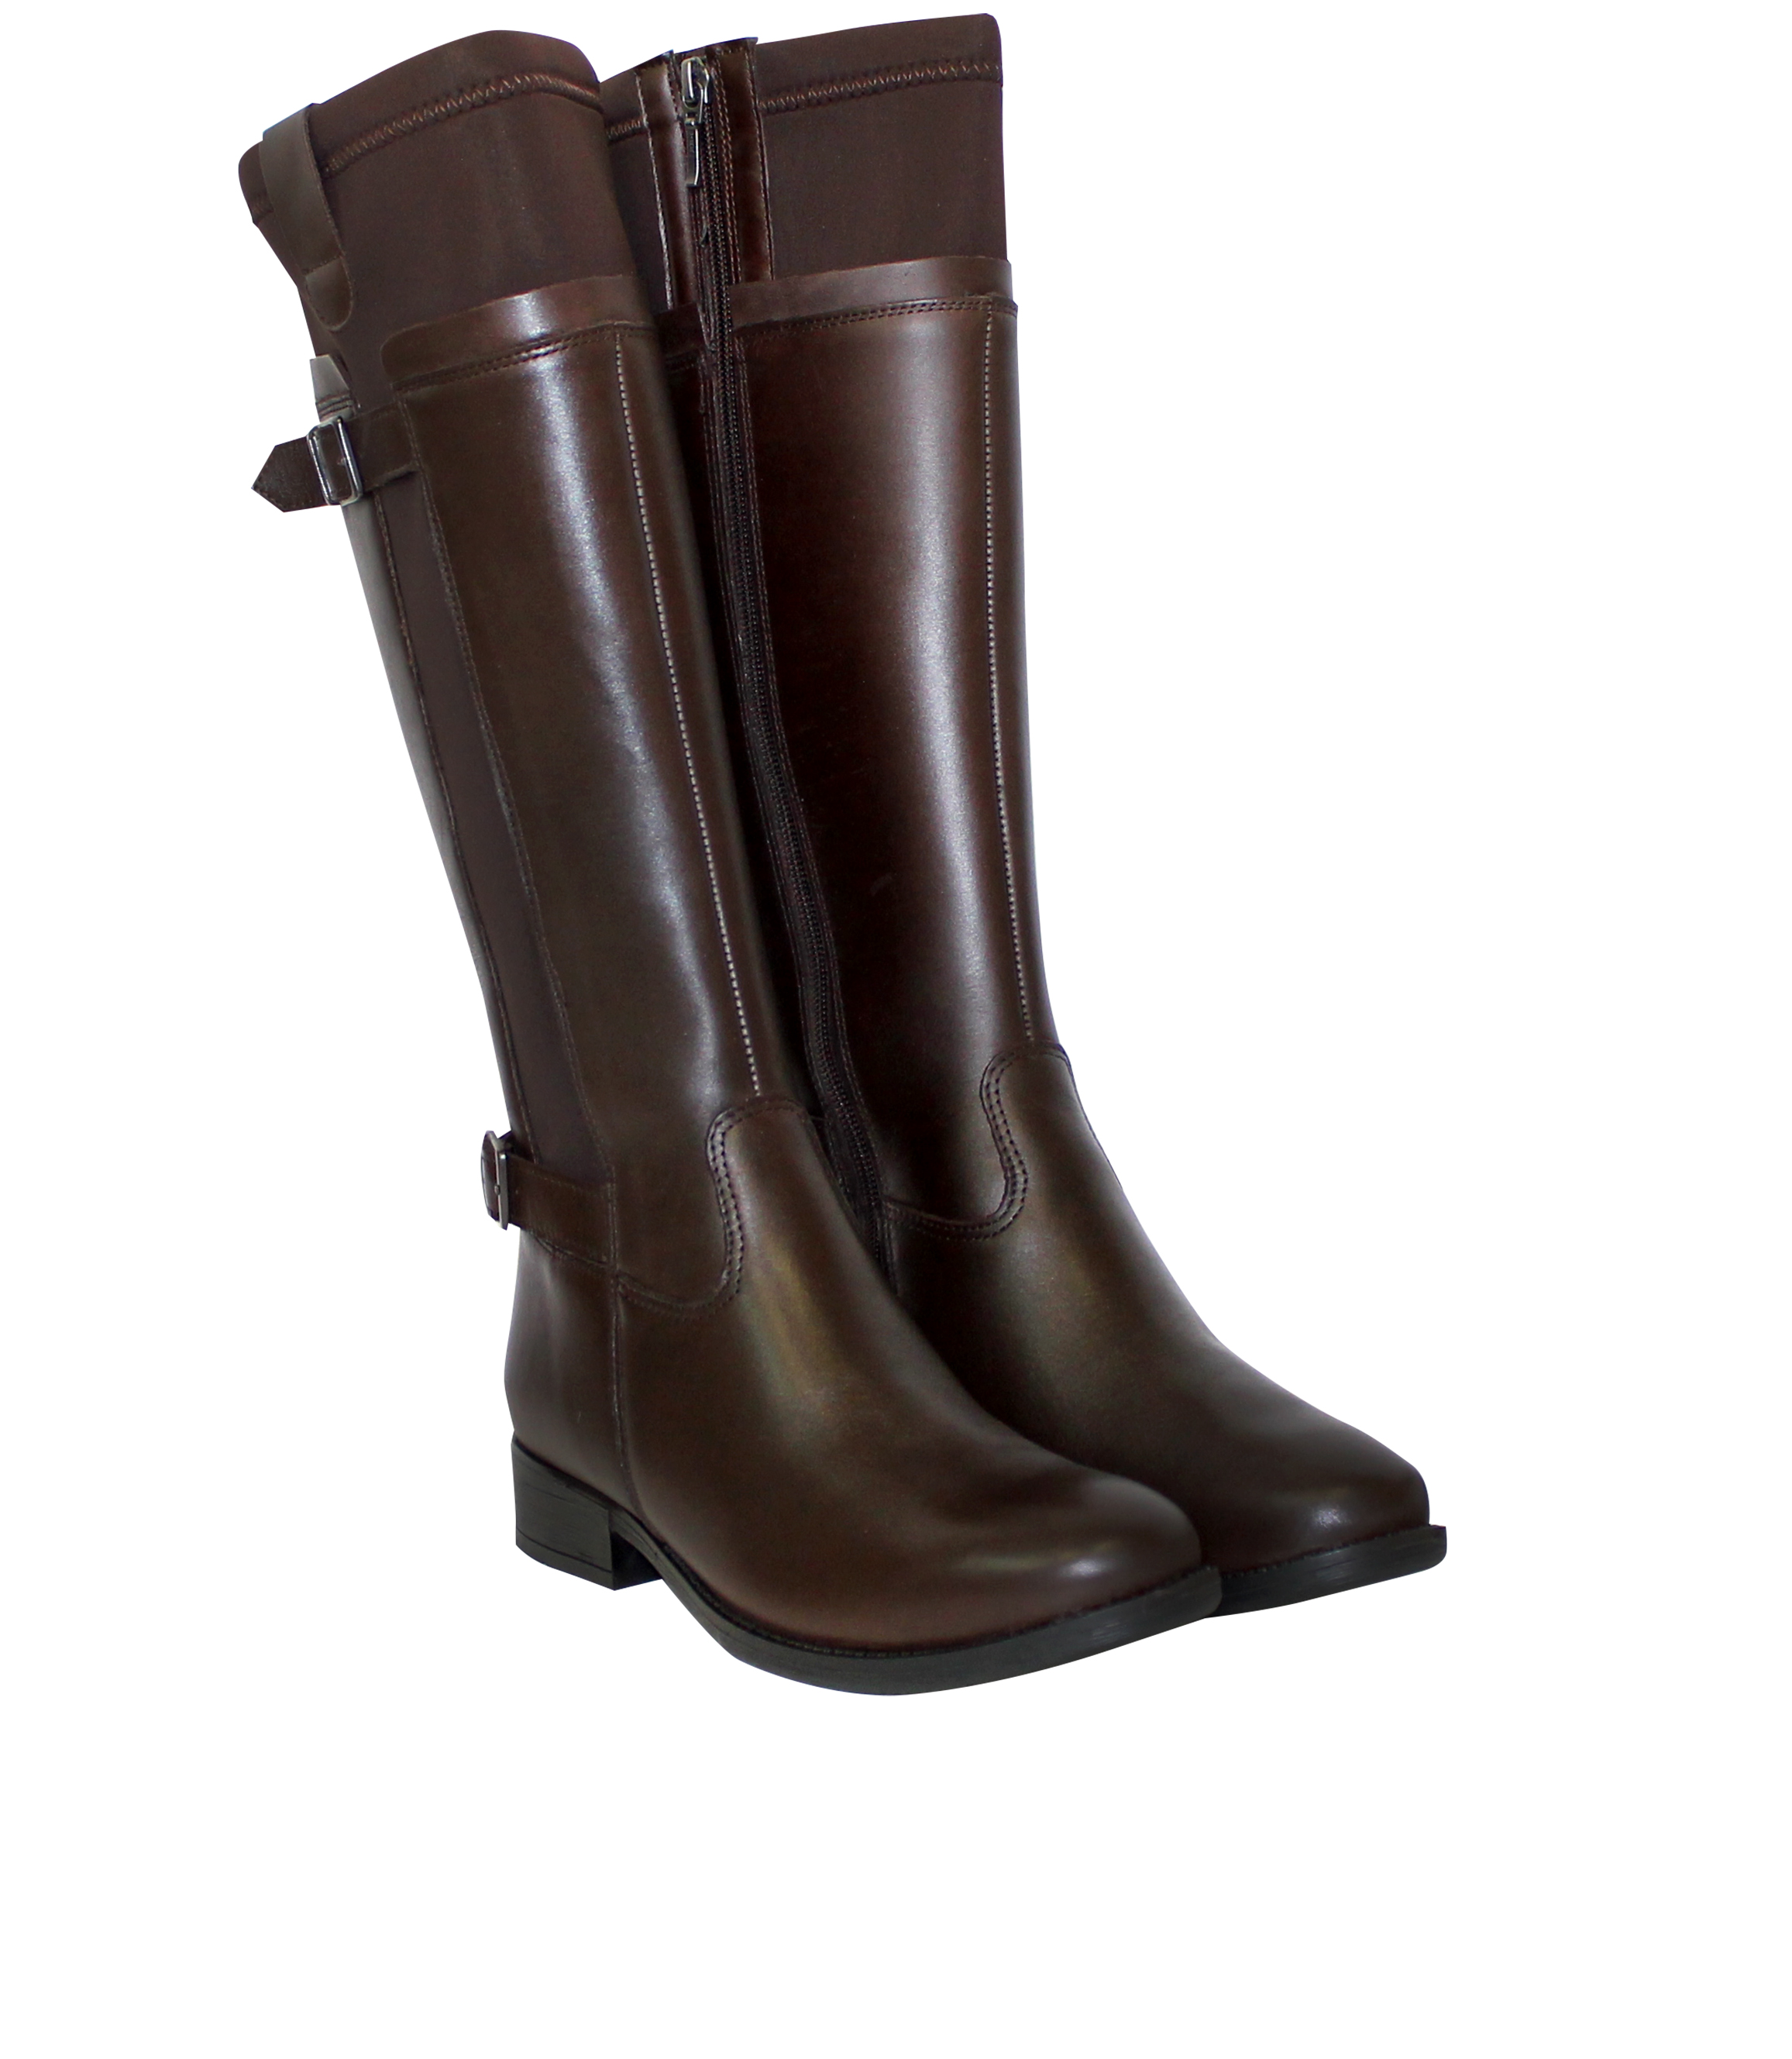 FROGGIE BROWN MULTI LONG BOOT - 10870 | Rosella - Style inspired by ...